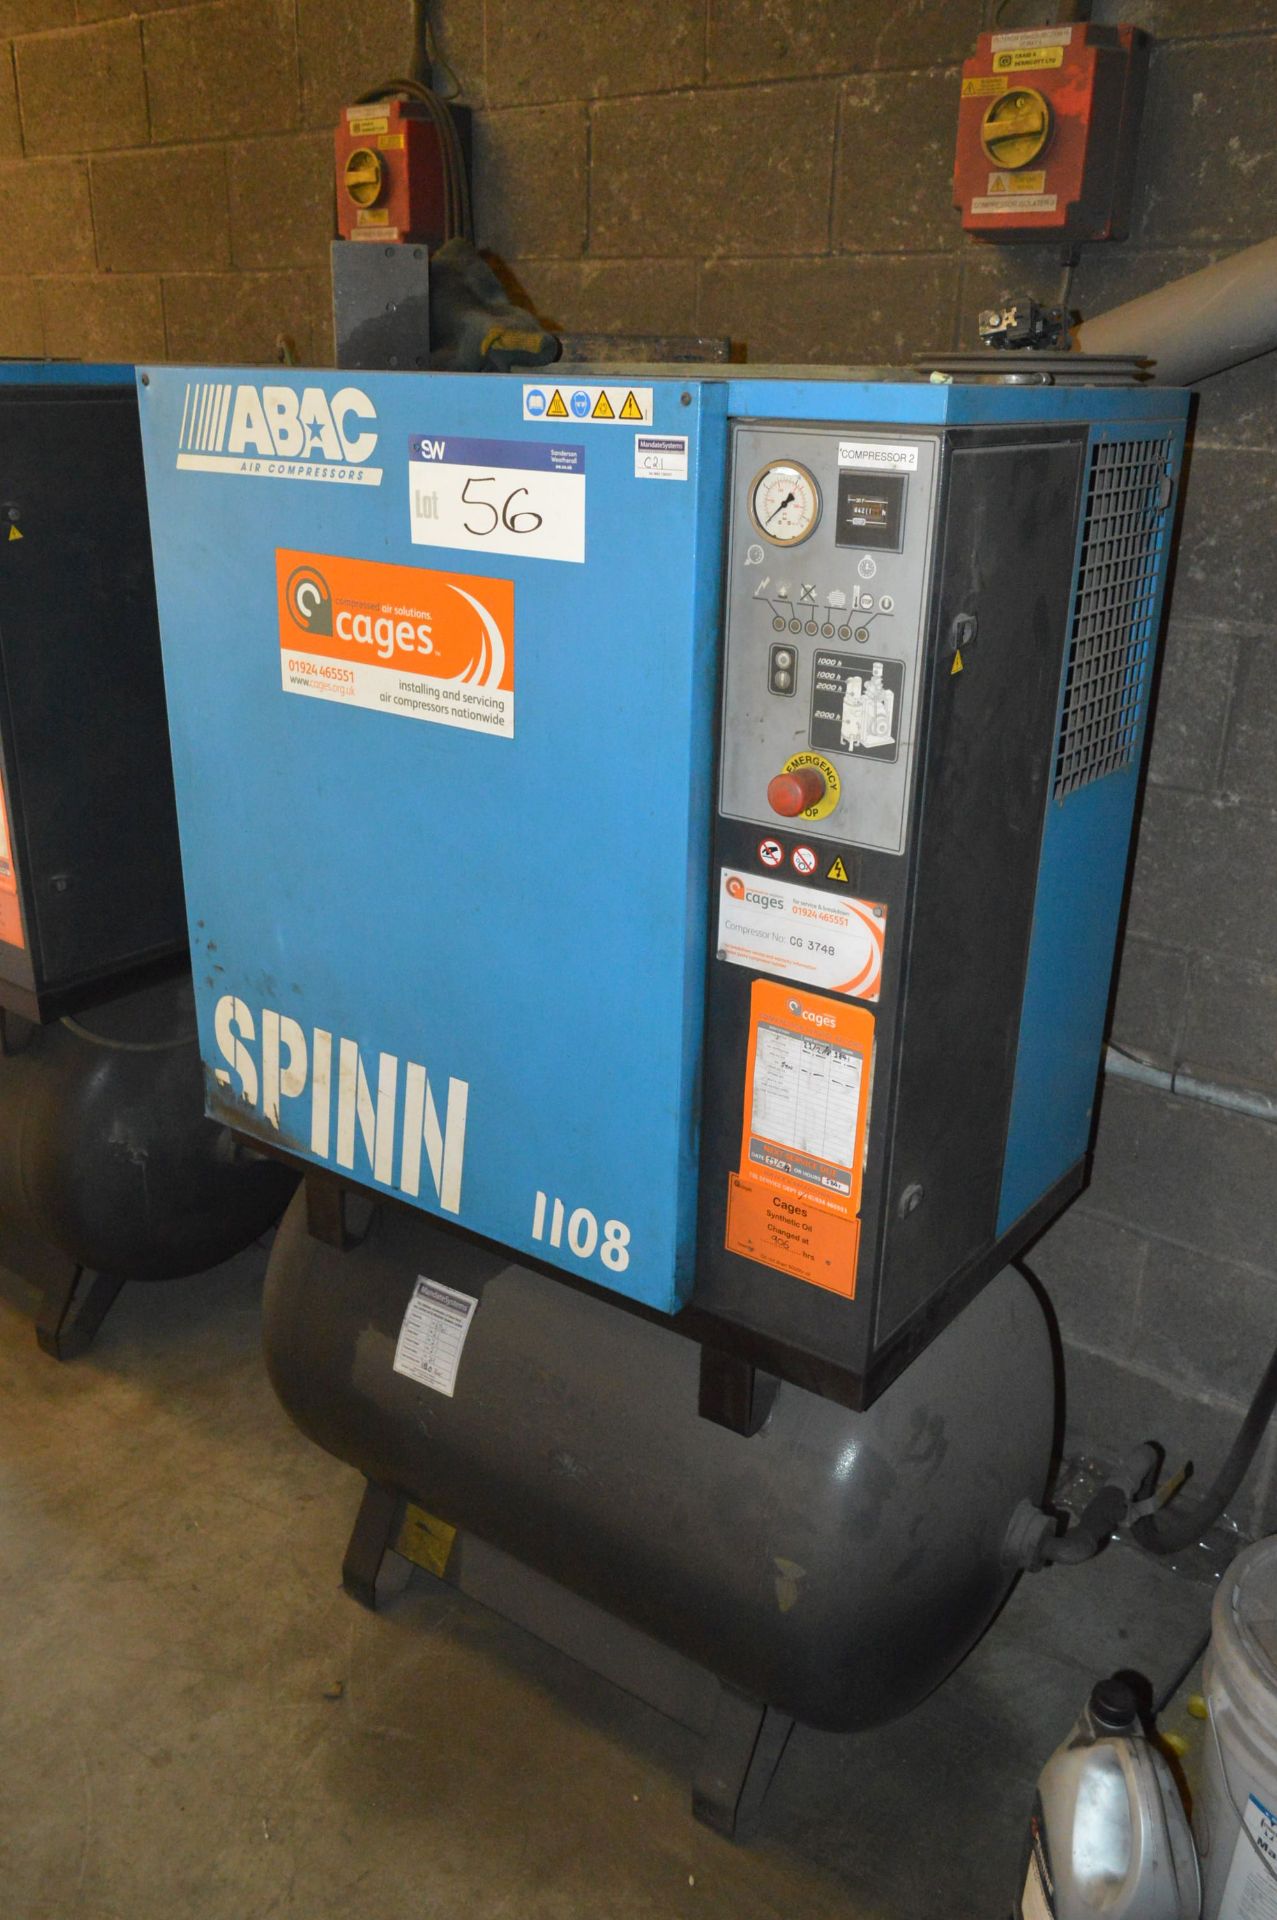 Abac Spinn 11kW Horizontal Receiver Mounted Air Compressor, serial no. ITR0132009, 1.65m³/min free